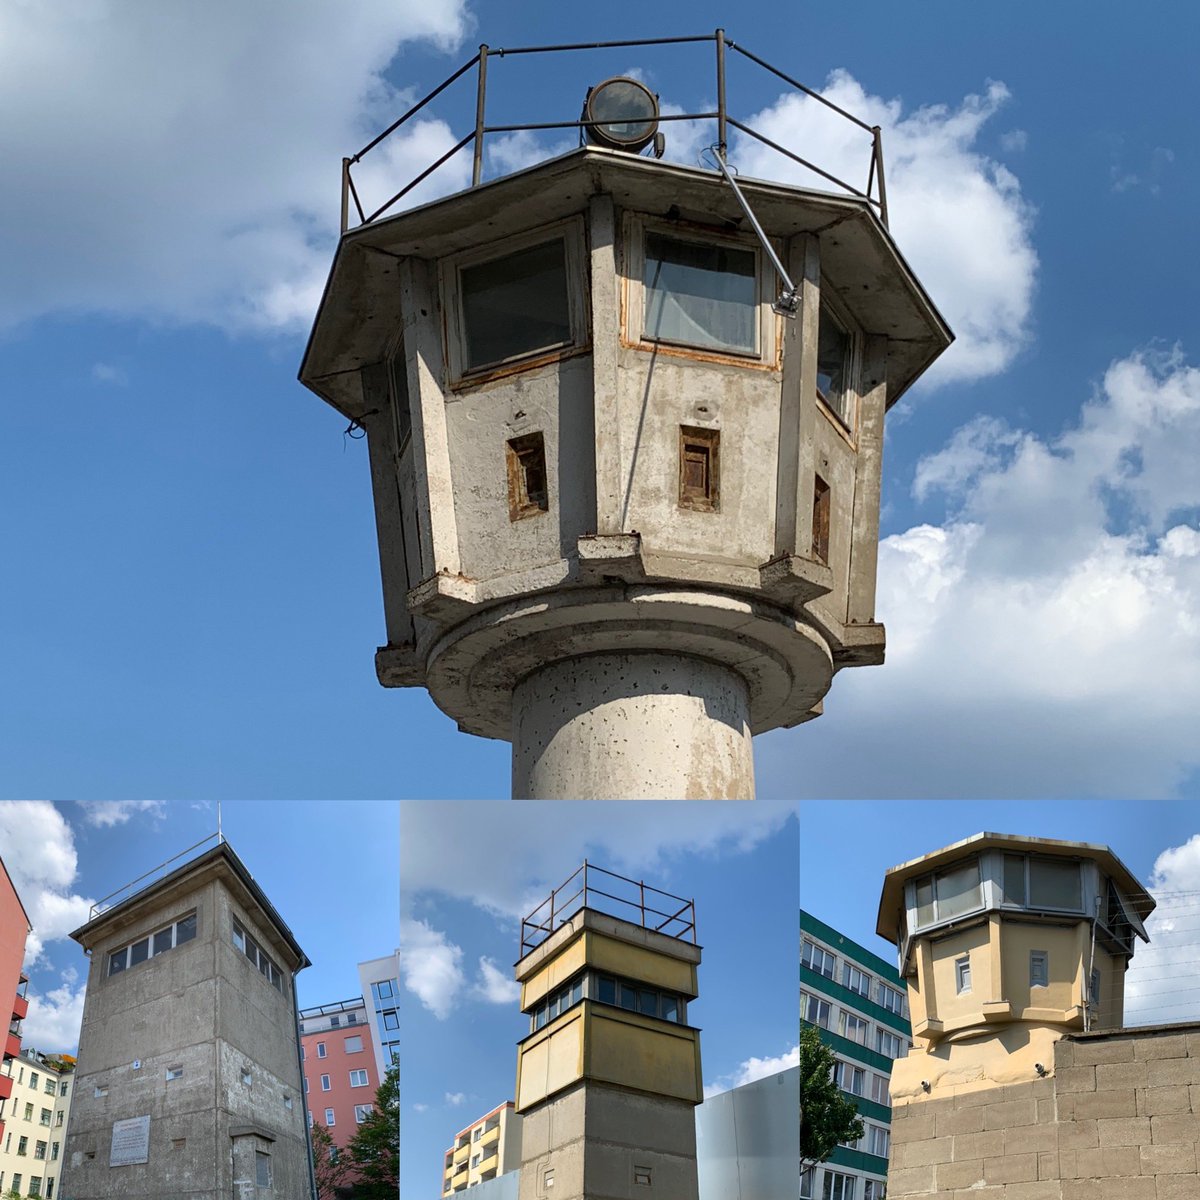 [TREAD] The Watchtowers of the Berlin Wall. We have commemorated this week the 59th (sad) anniversary of the erection of the Berlin Wall. It has now nearly totally disappeared inside the city of Berlin. 160 km long, it included 302  #Watchtowers. Only a few remain in  #Berlin.